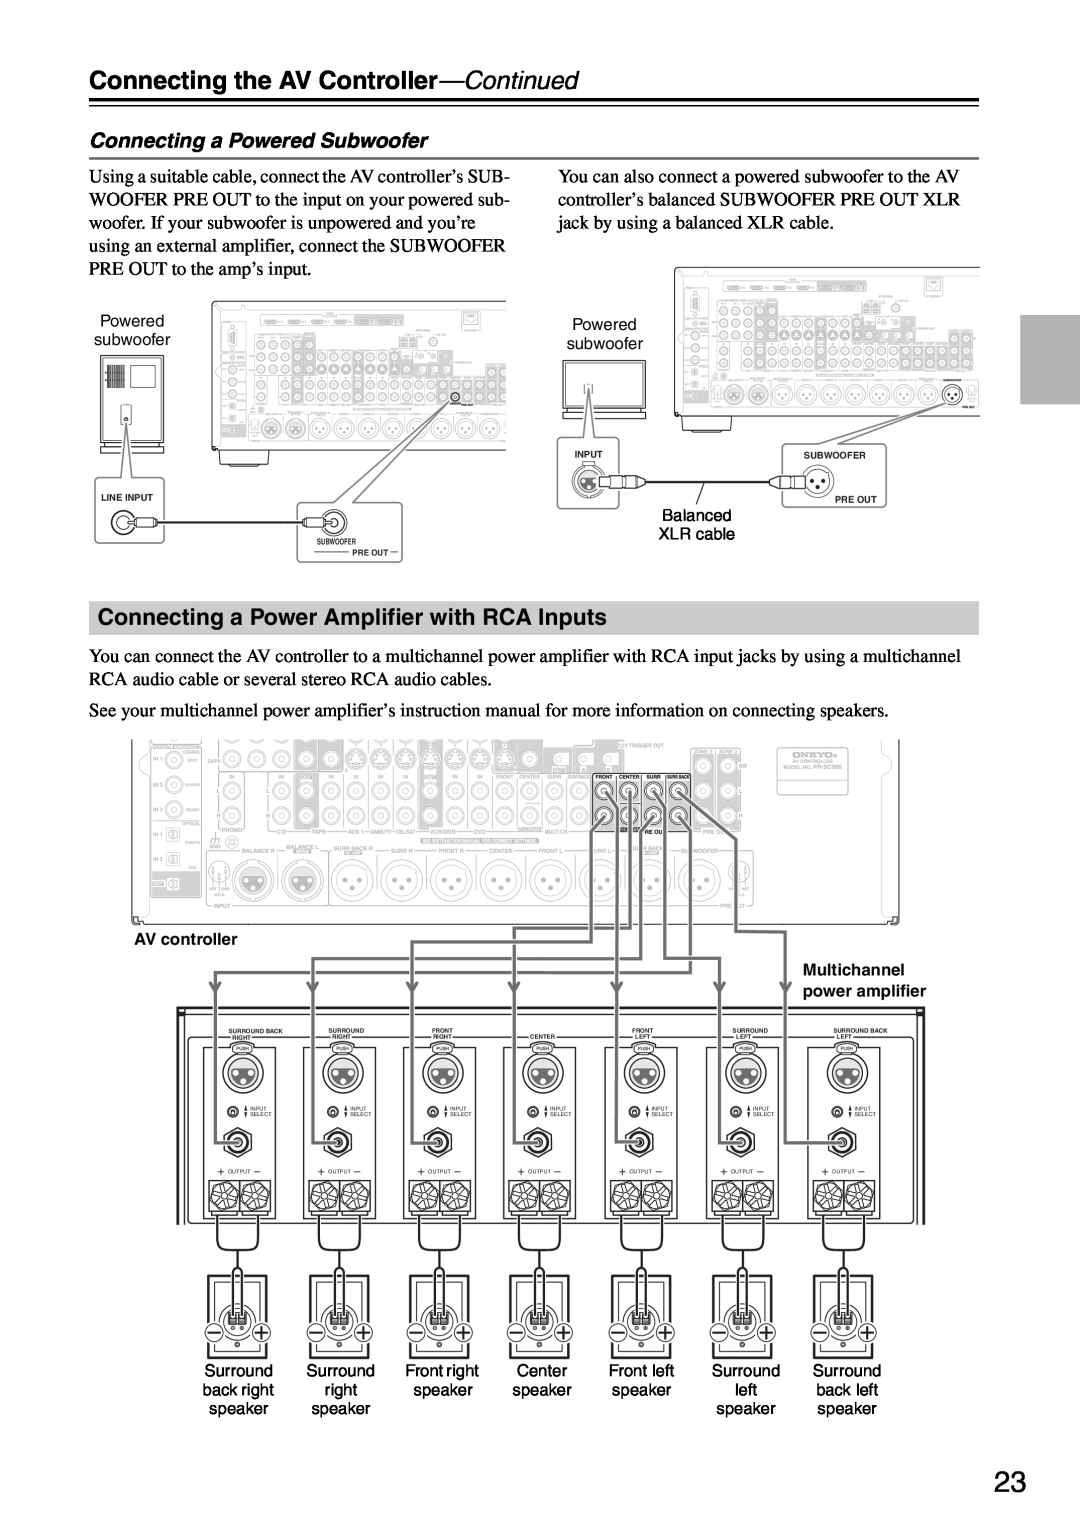 Onkyo PR-SC886 instruction manual Connecting the AV Controller—Continued, Connecting a Power Amplifier with RCA Inputs 